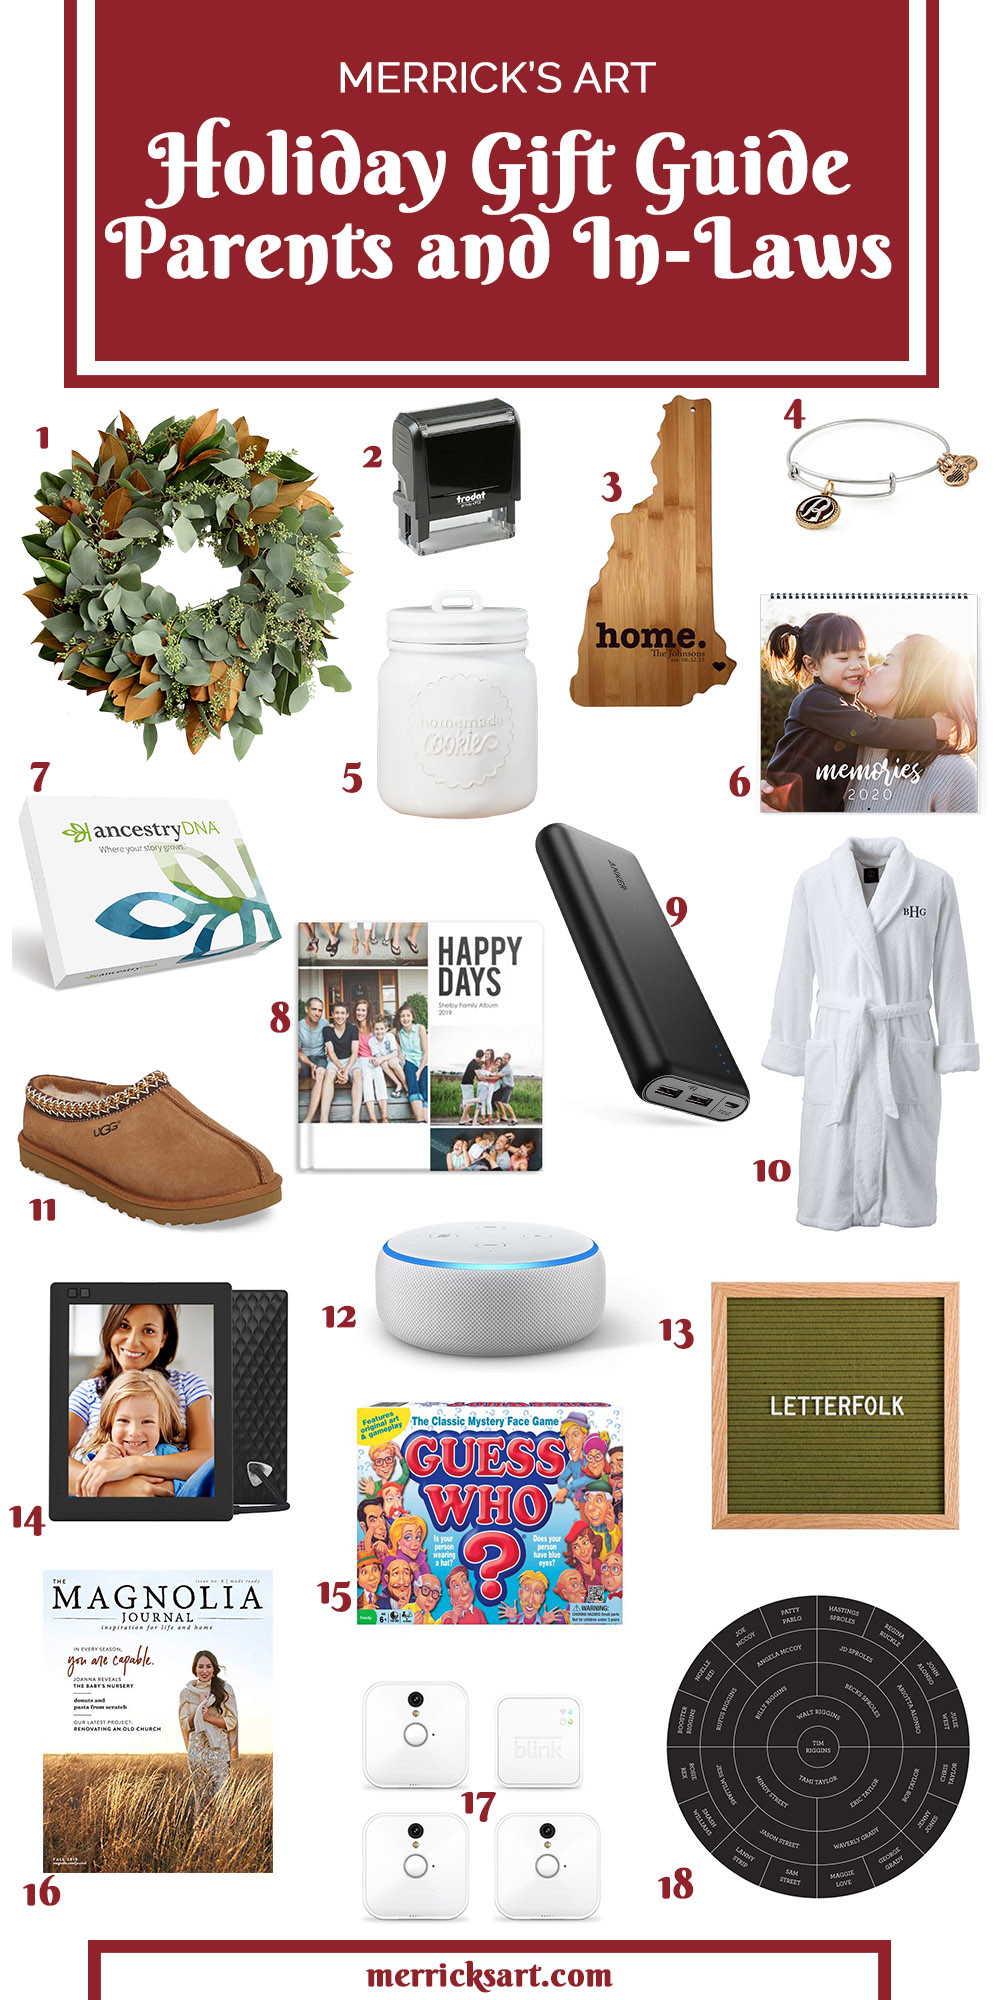 Gift Ideas For Parents Christmas
 Christmas Gifts for Parents and In Laws 50 Great Ideas